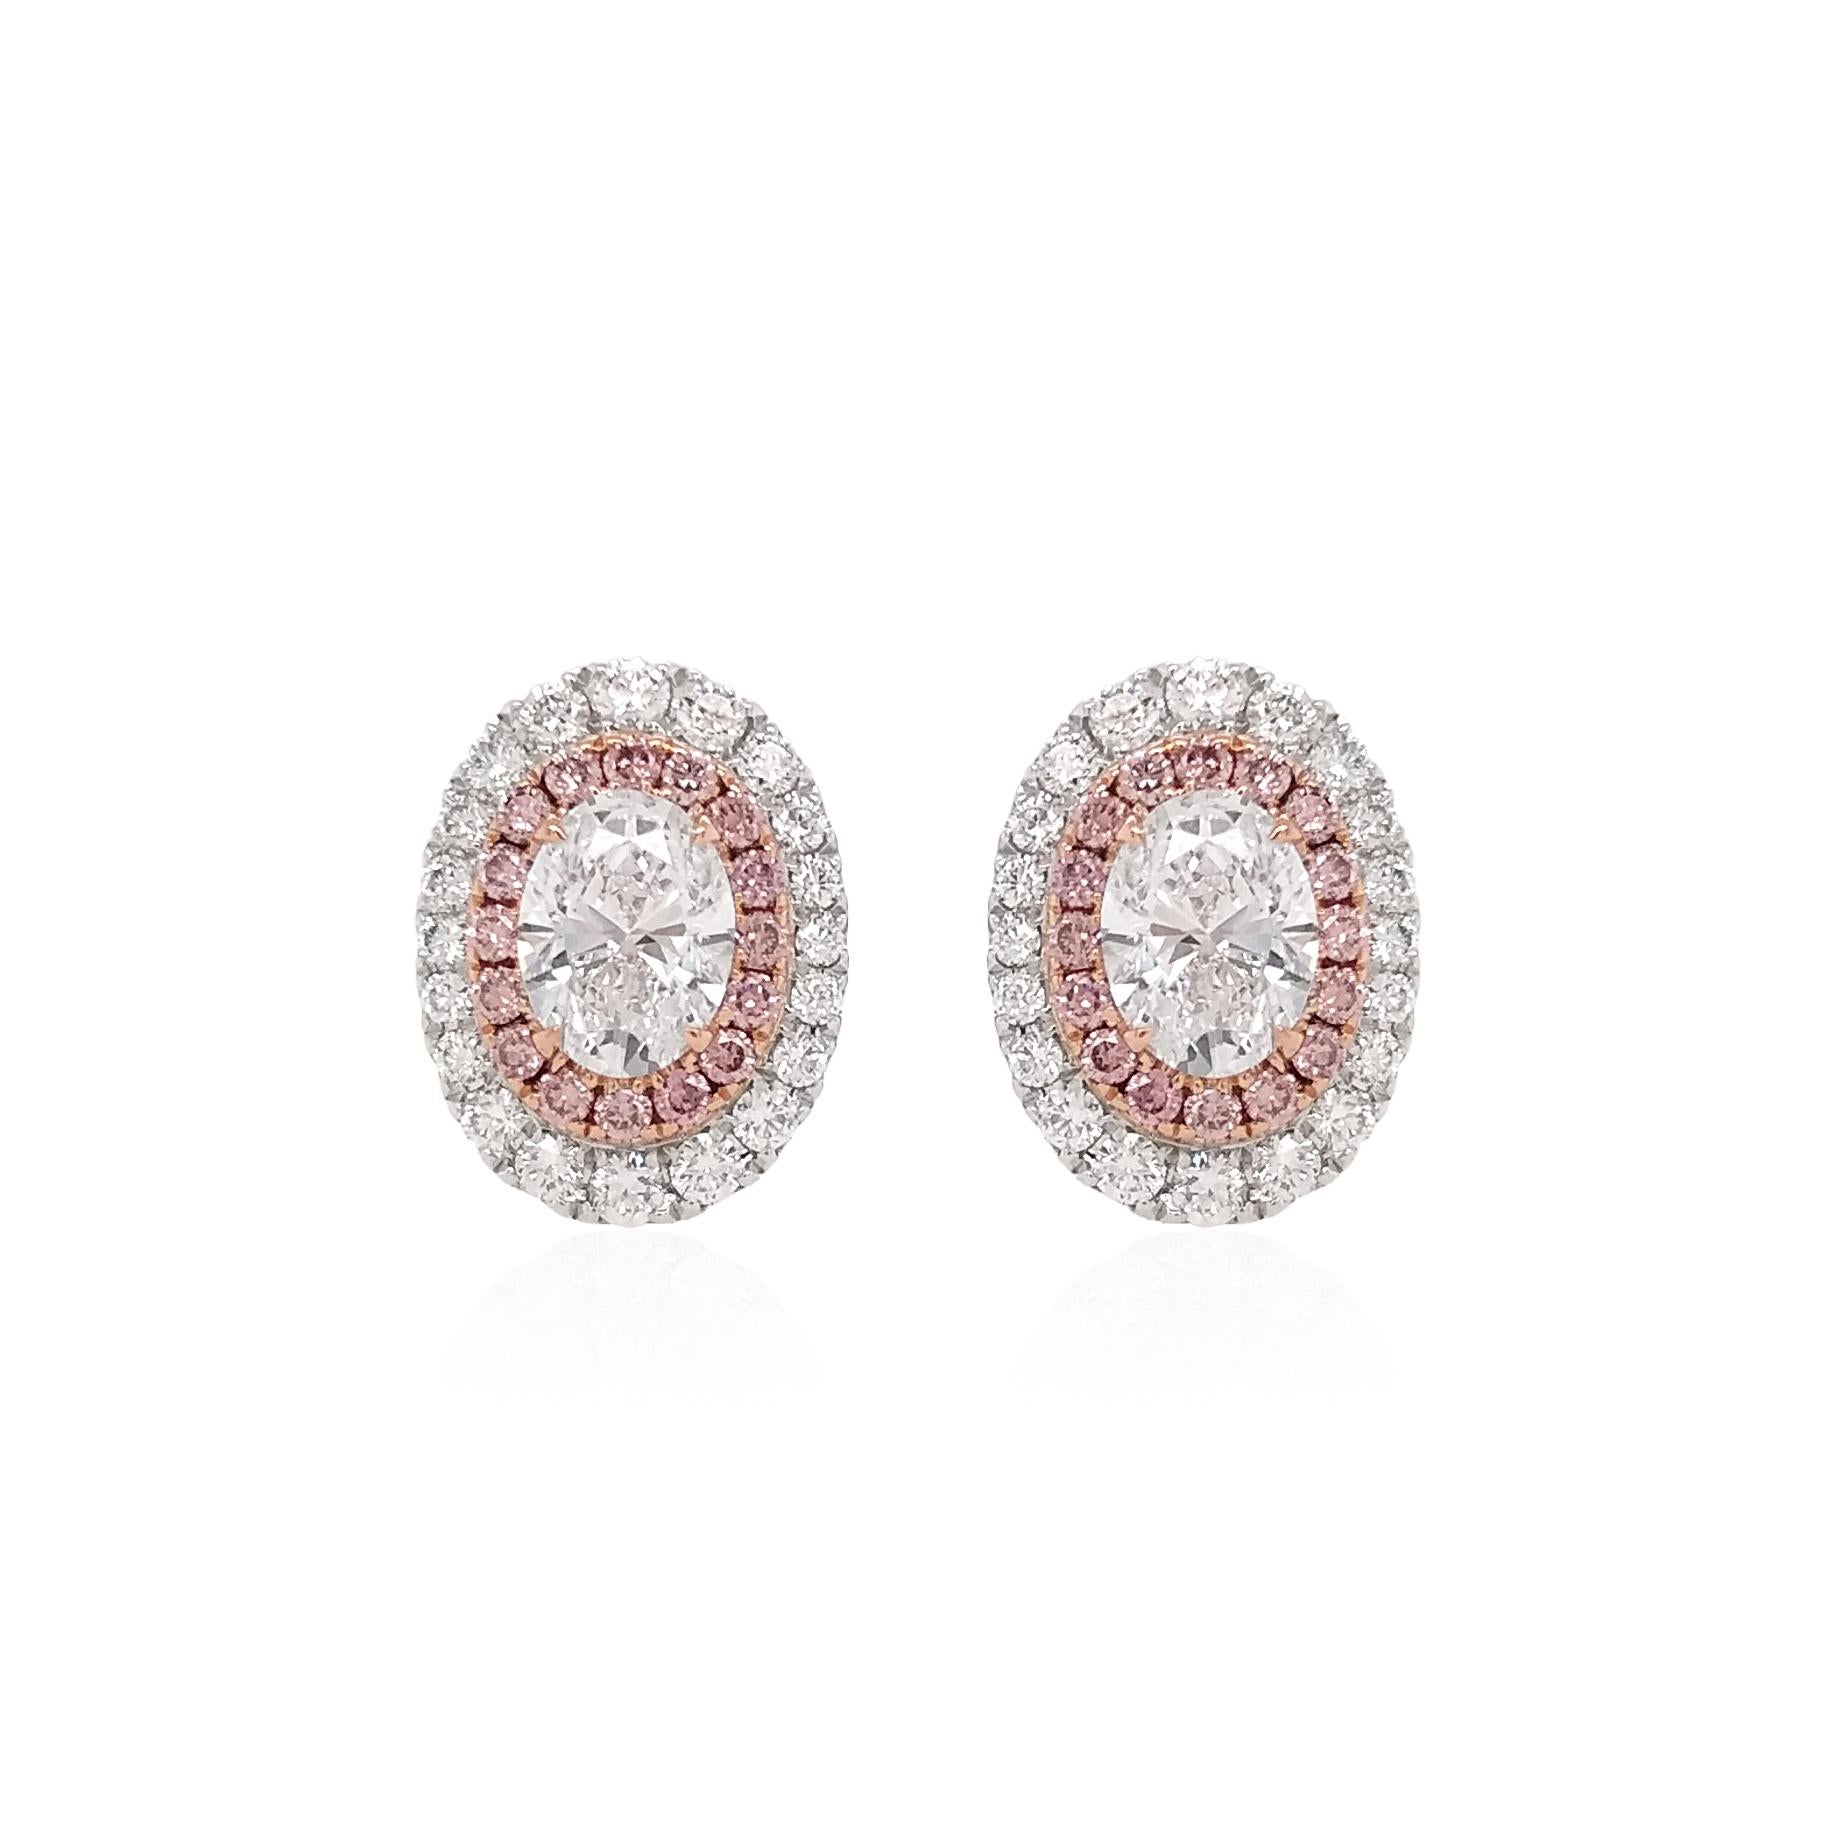 The timeless combination of White Diamond and Argyle Pink Diamond has been re-imagined in these glamorous earrings. Featuring dazzling White Diamonds, surrounded halos of Argyle Pink Diamonds and White Diamonds in this piece, emits a rich hue that